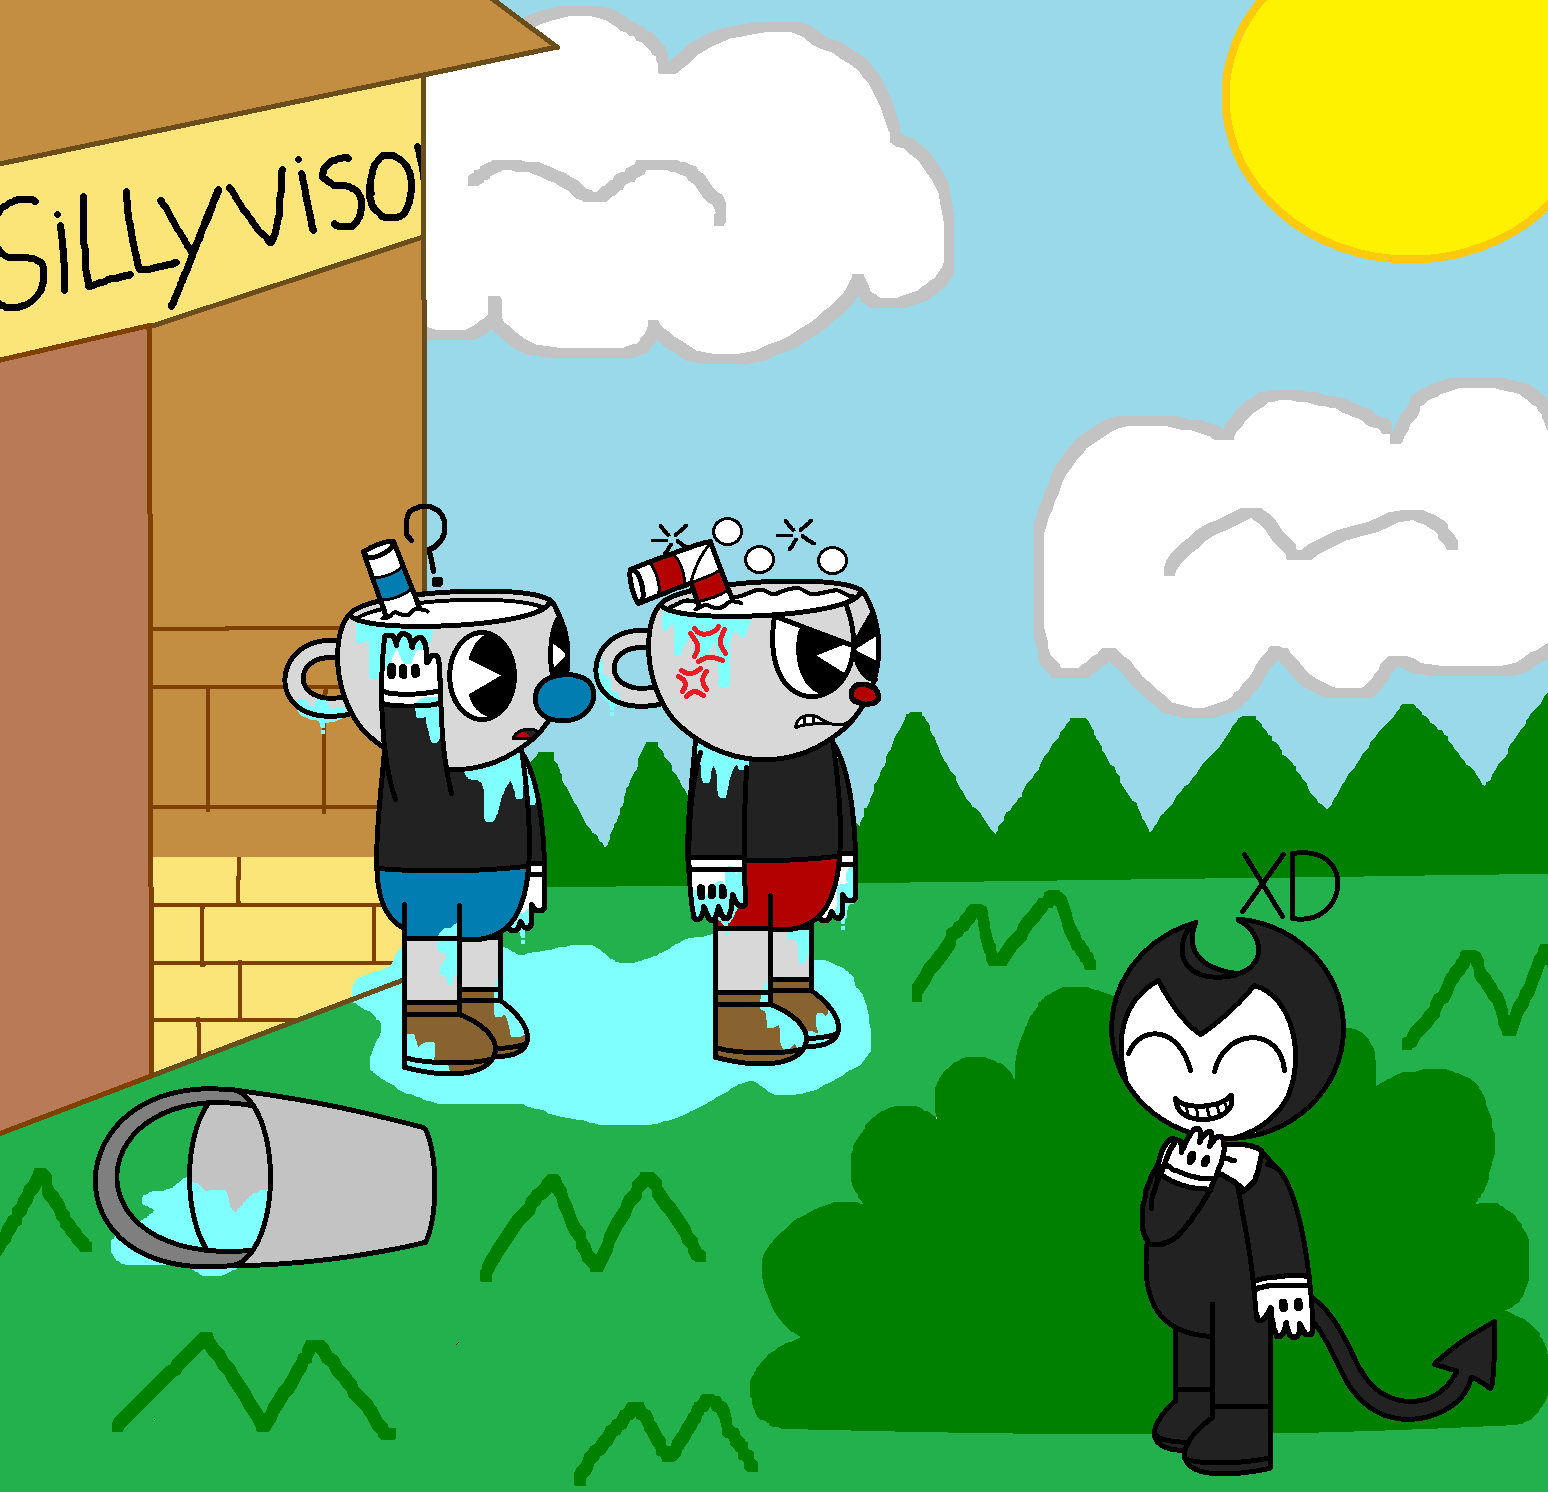 Drew this in honor of The Cuphead Show! : r/Cuphead